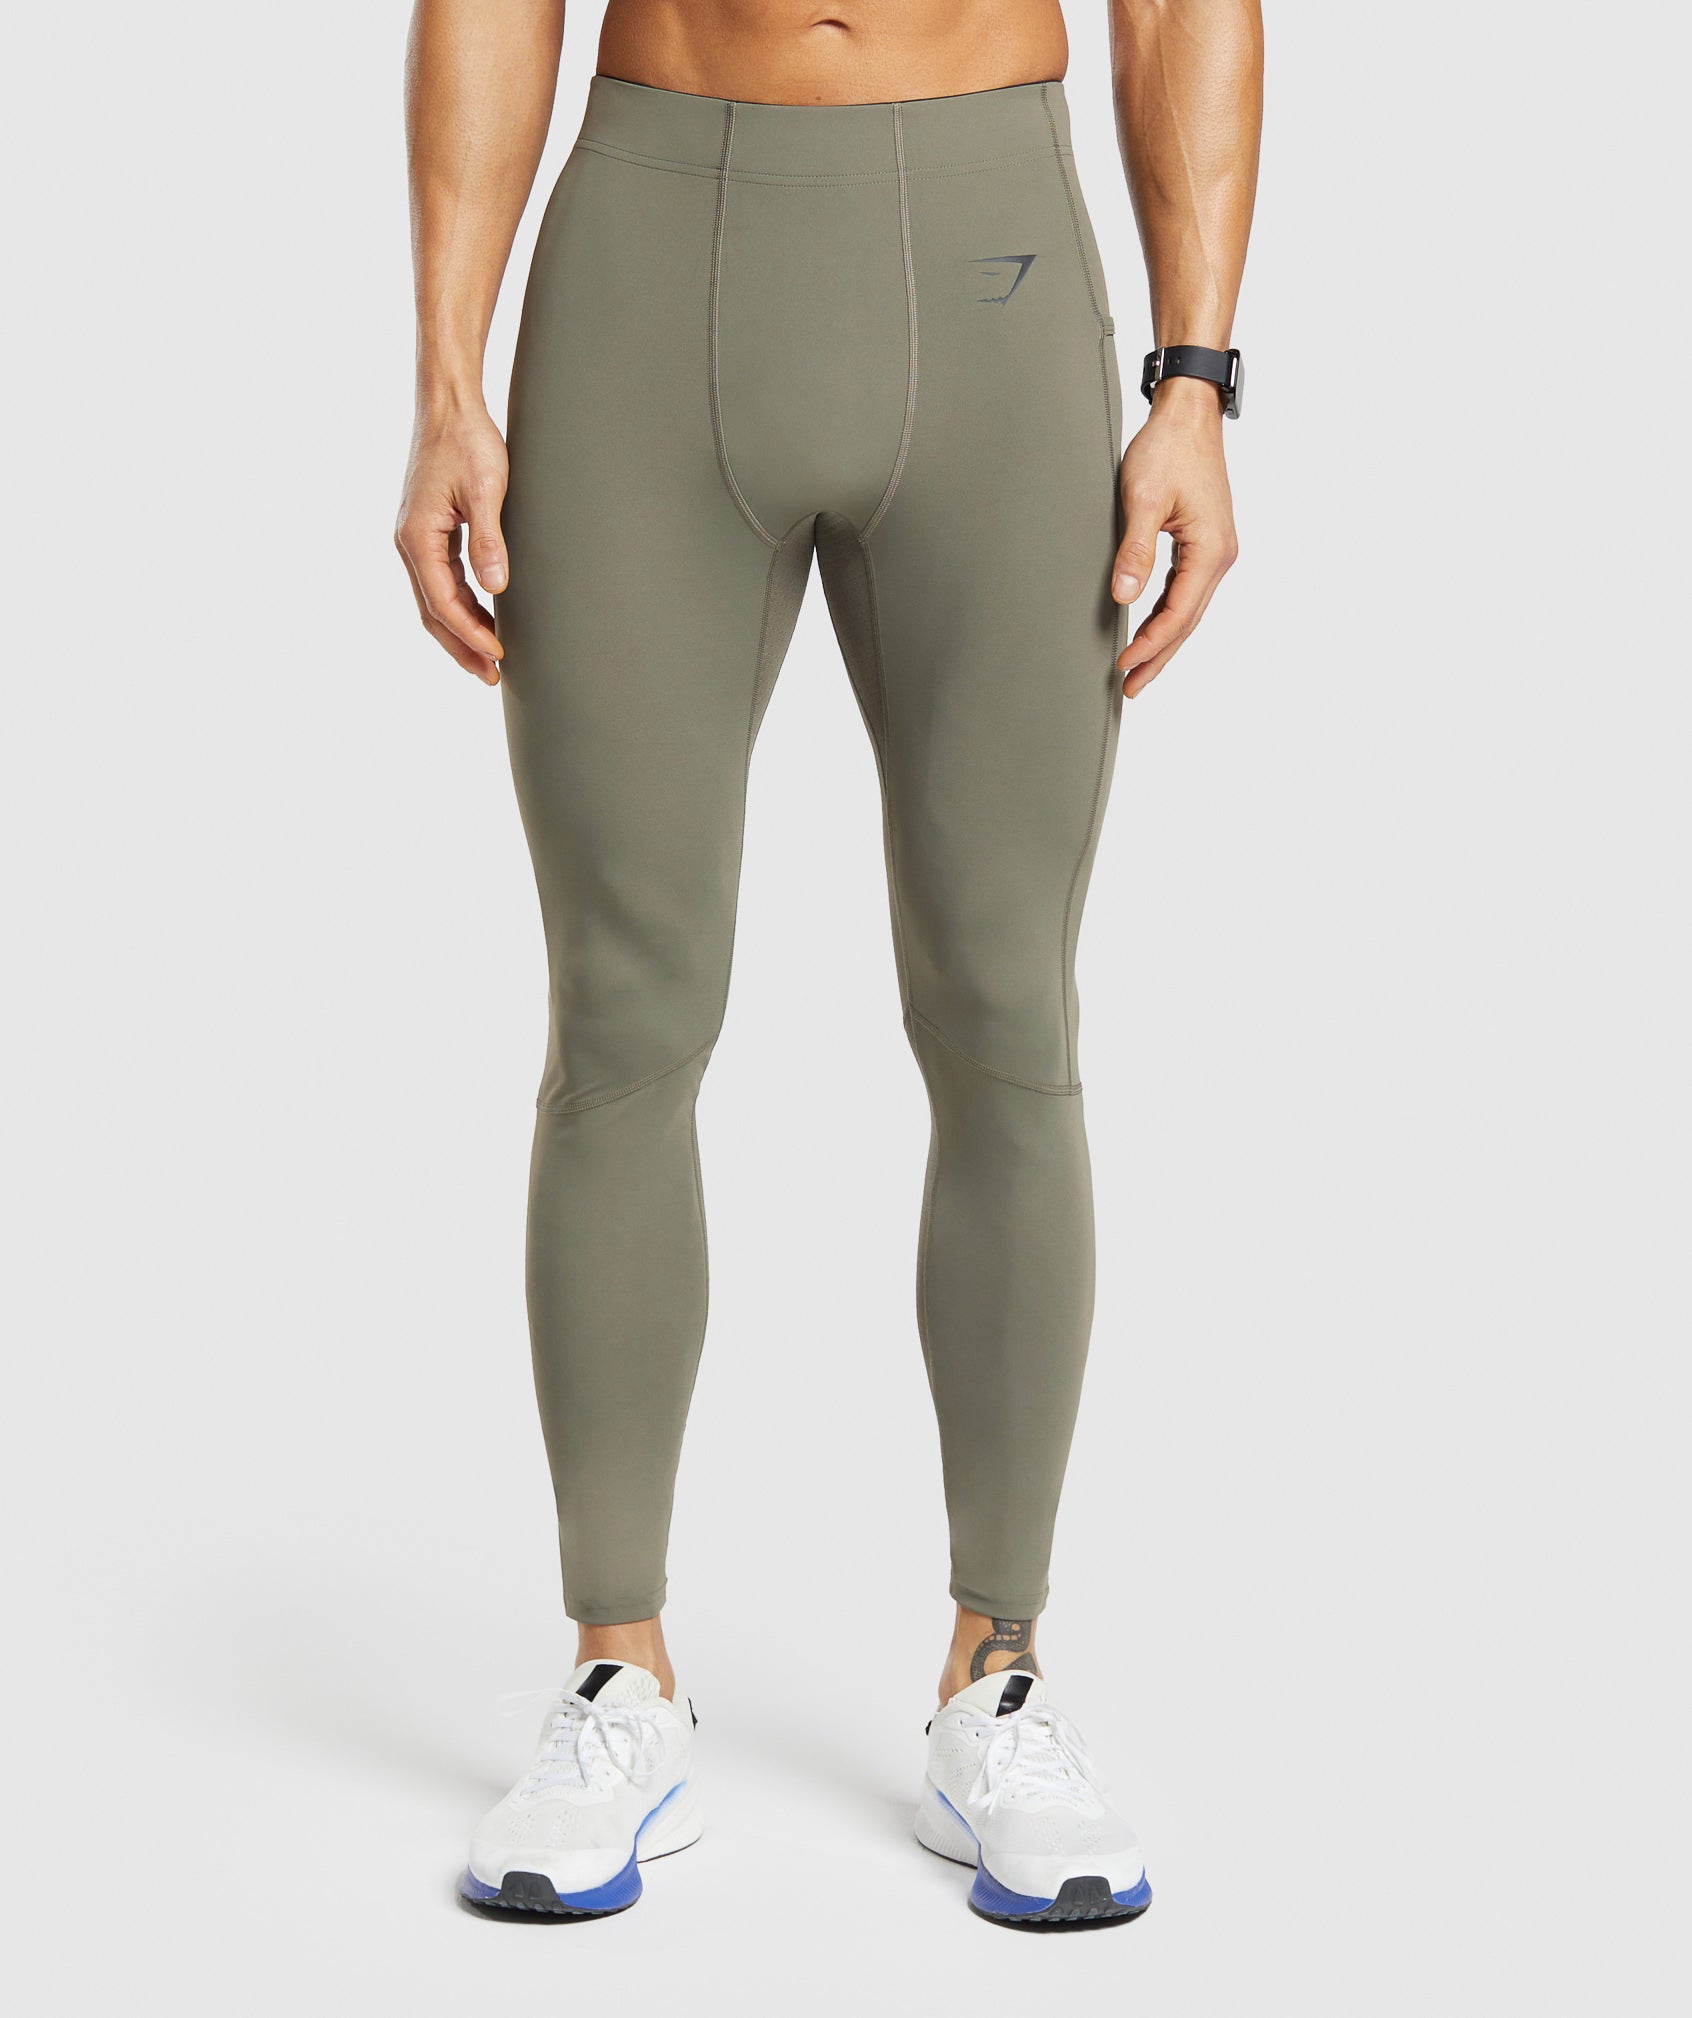 Control Baselayer Leggings in {{variantColor} is out of stock